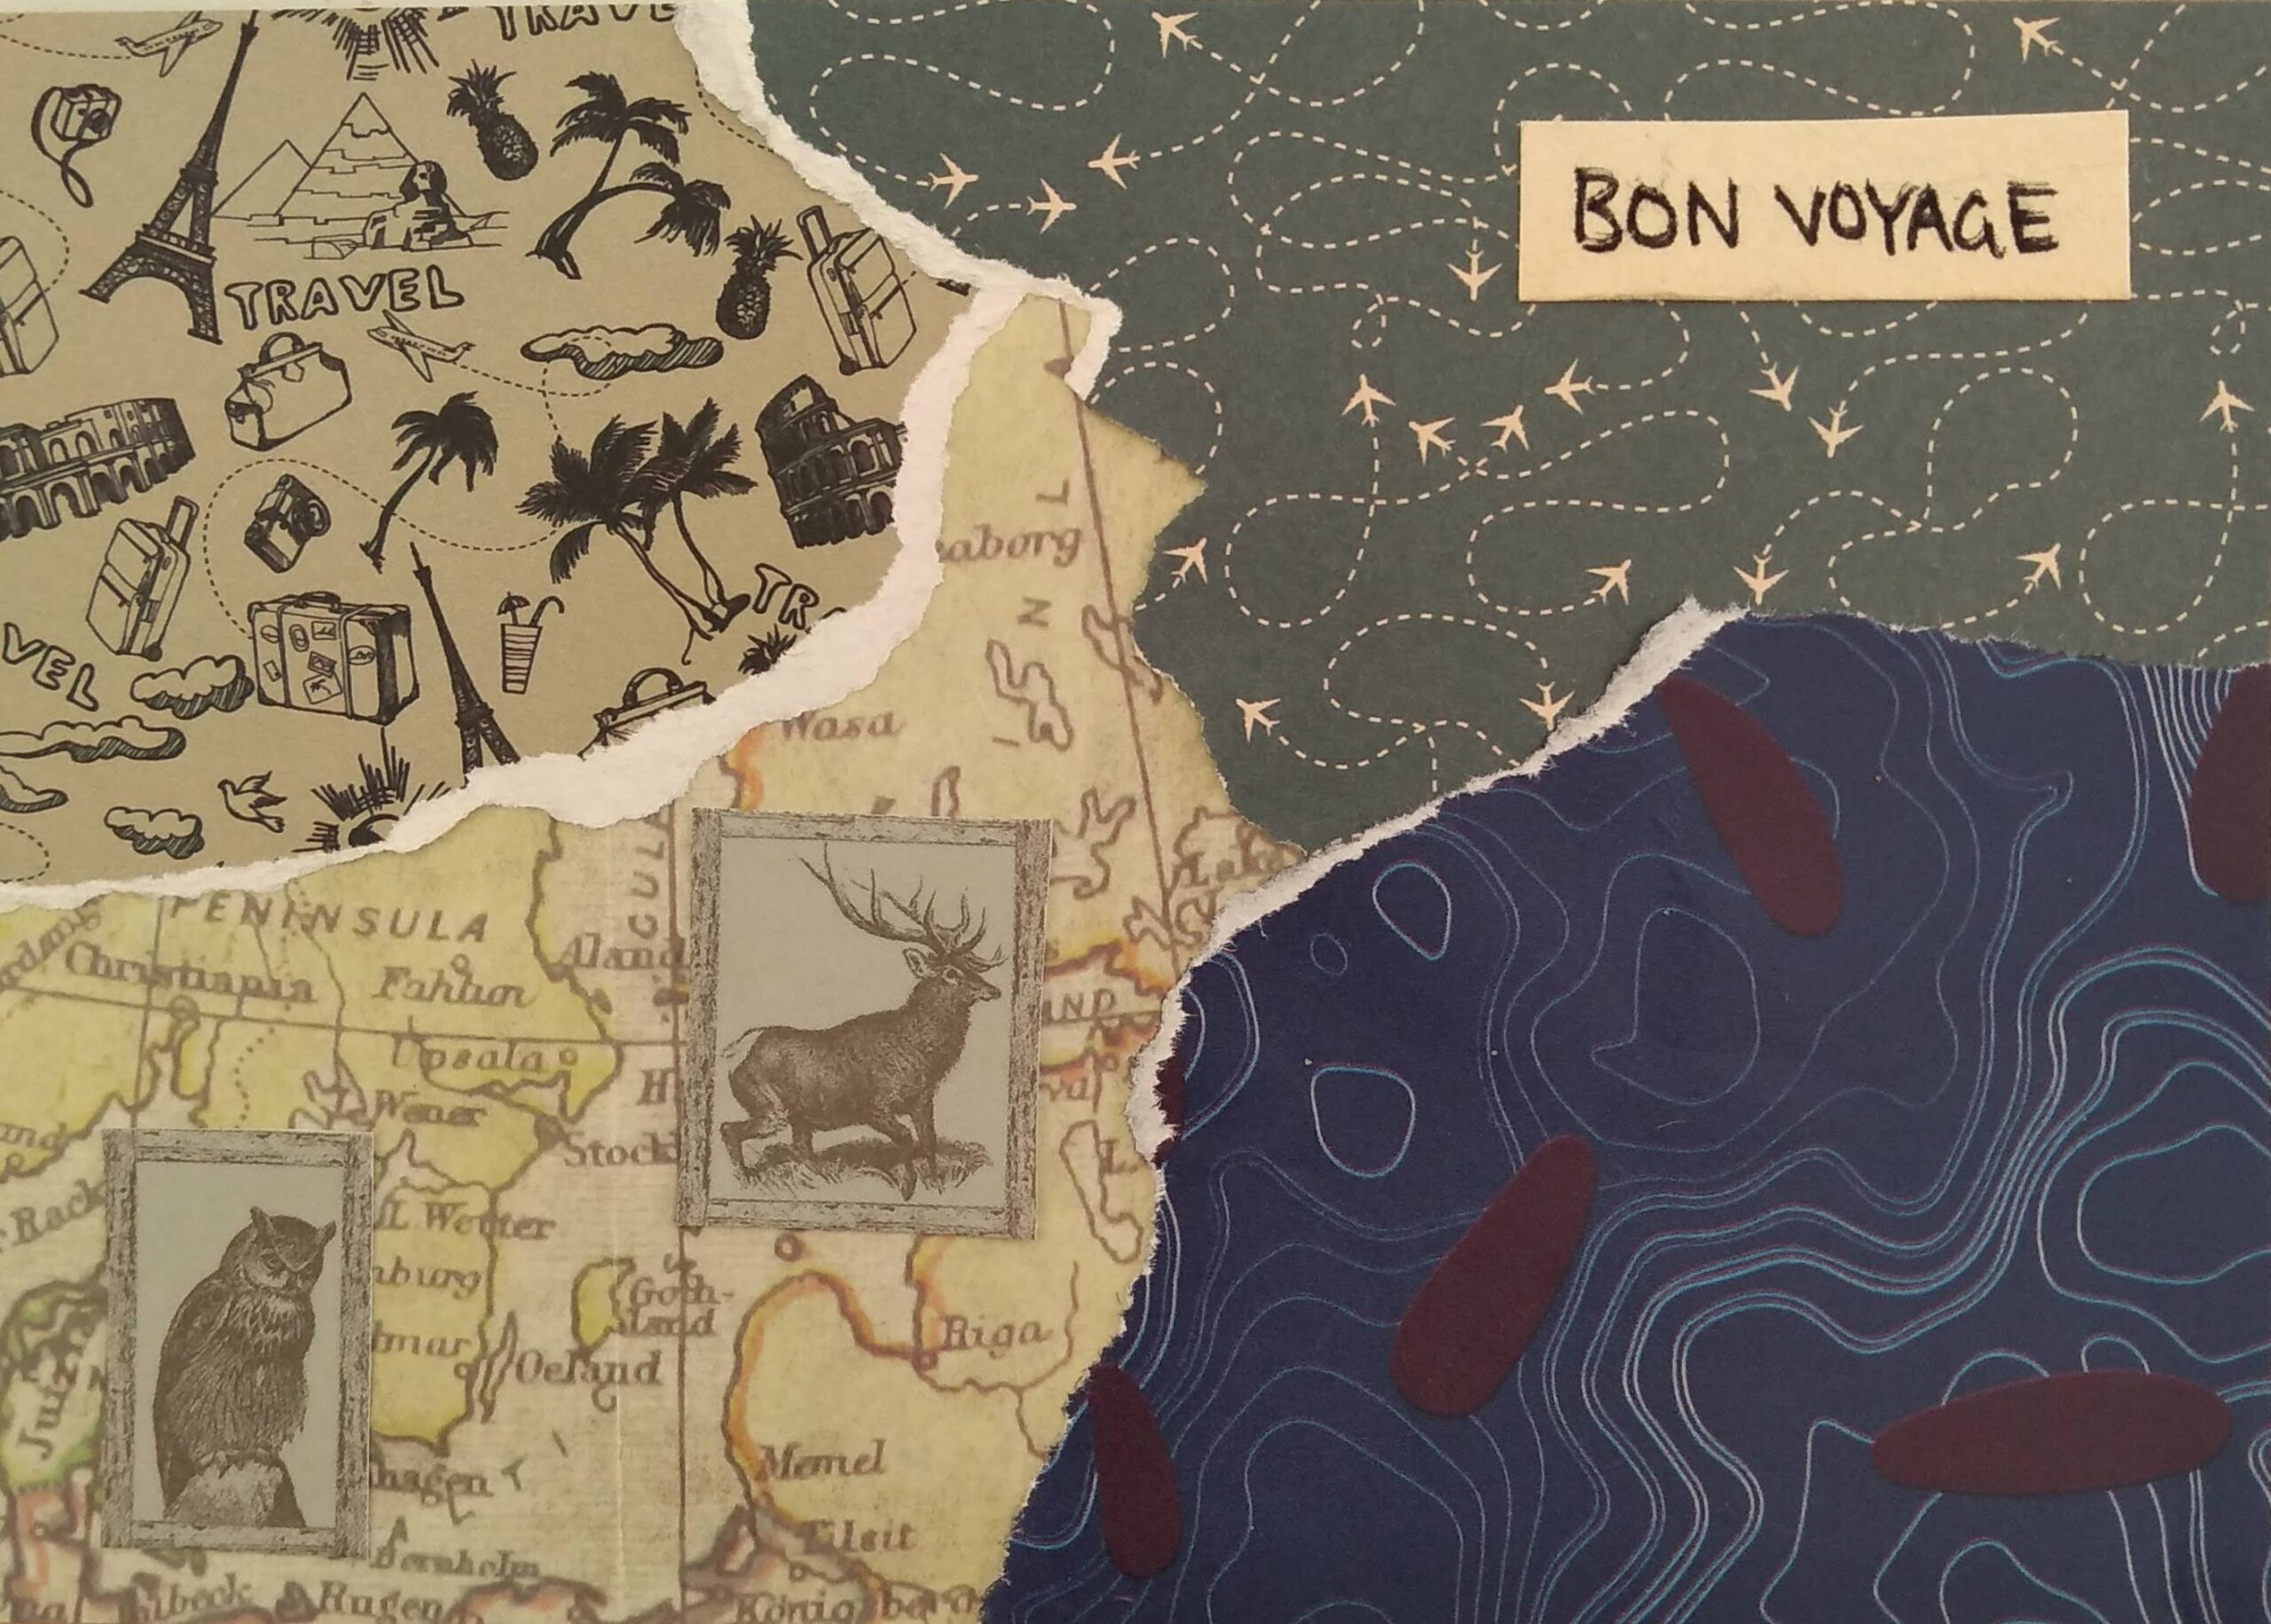 A collaged postcard with images of travel motifs, swirling blue and white surf, part of a map embellished with images of an owl and a stag, and the words Bon Voyage in the top right corner